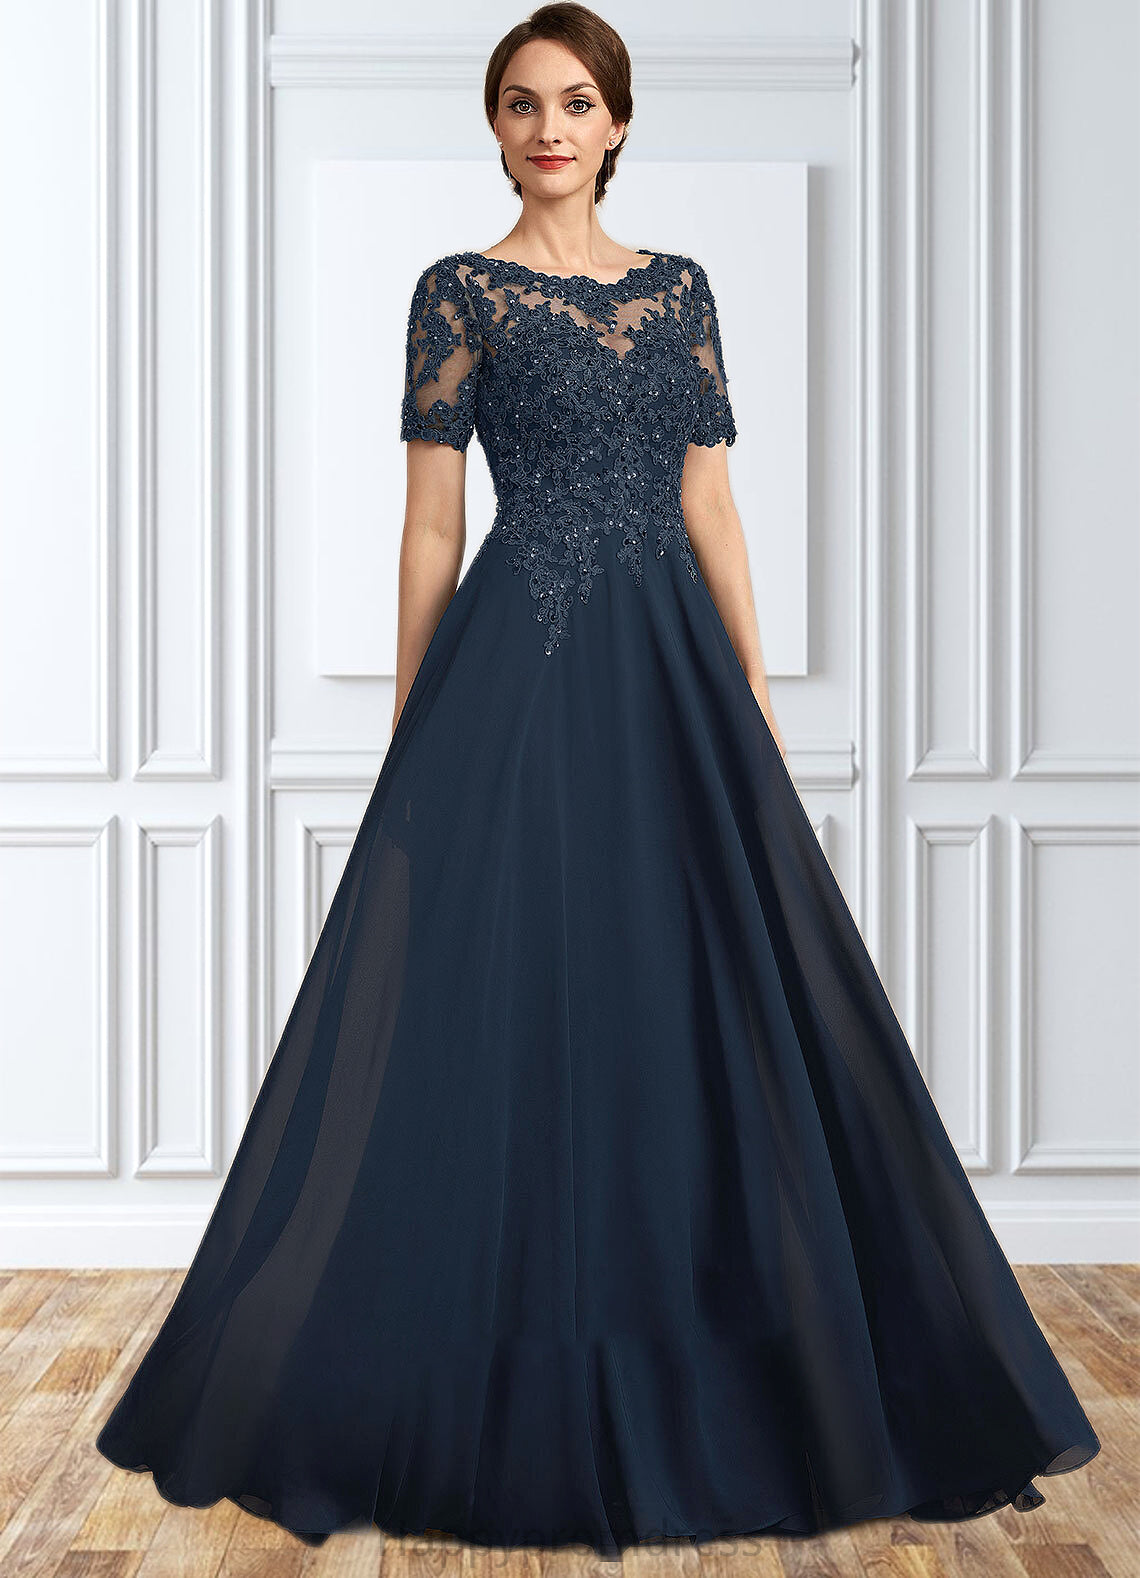 Clara A-Line Scoop Neck Floor-Length Chiffon Lace Mother of the Bride Dress With Beading Sequins XXS126P0014577